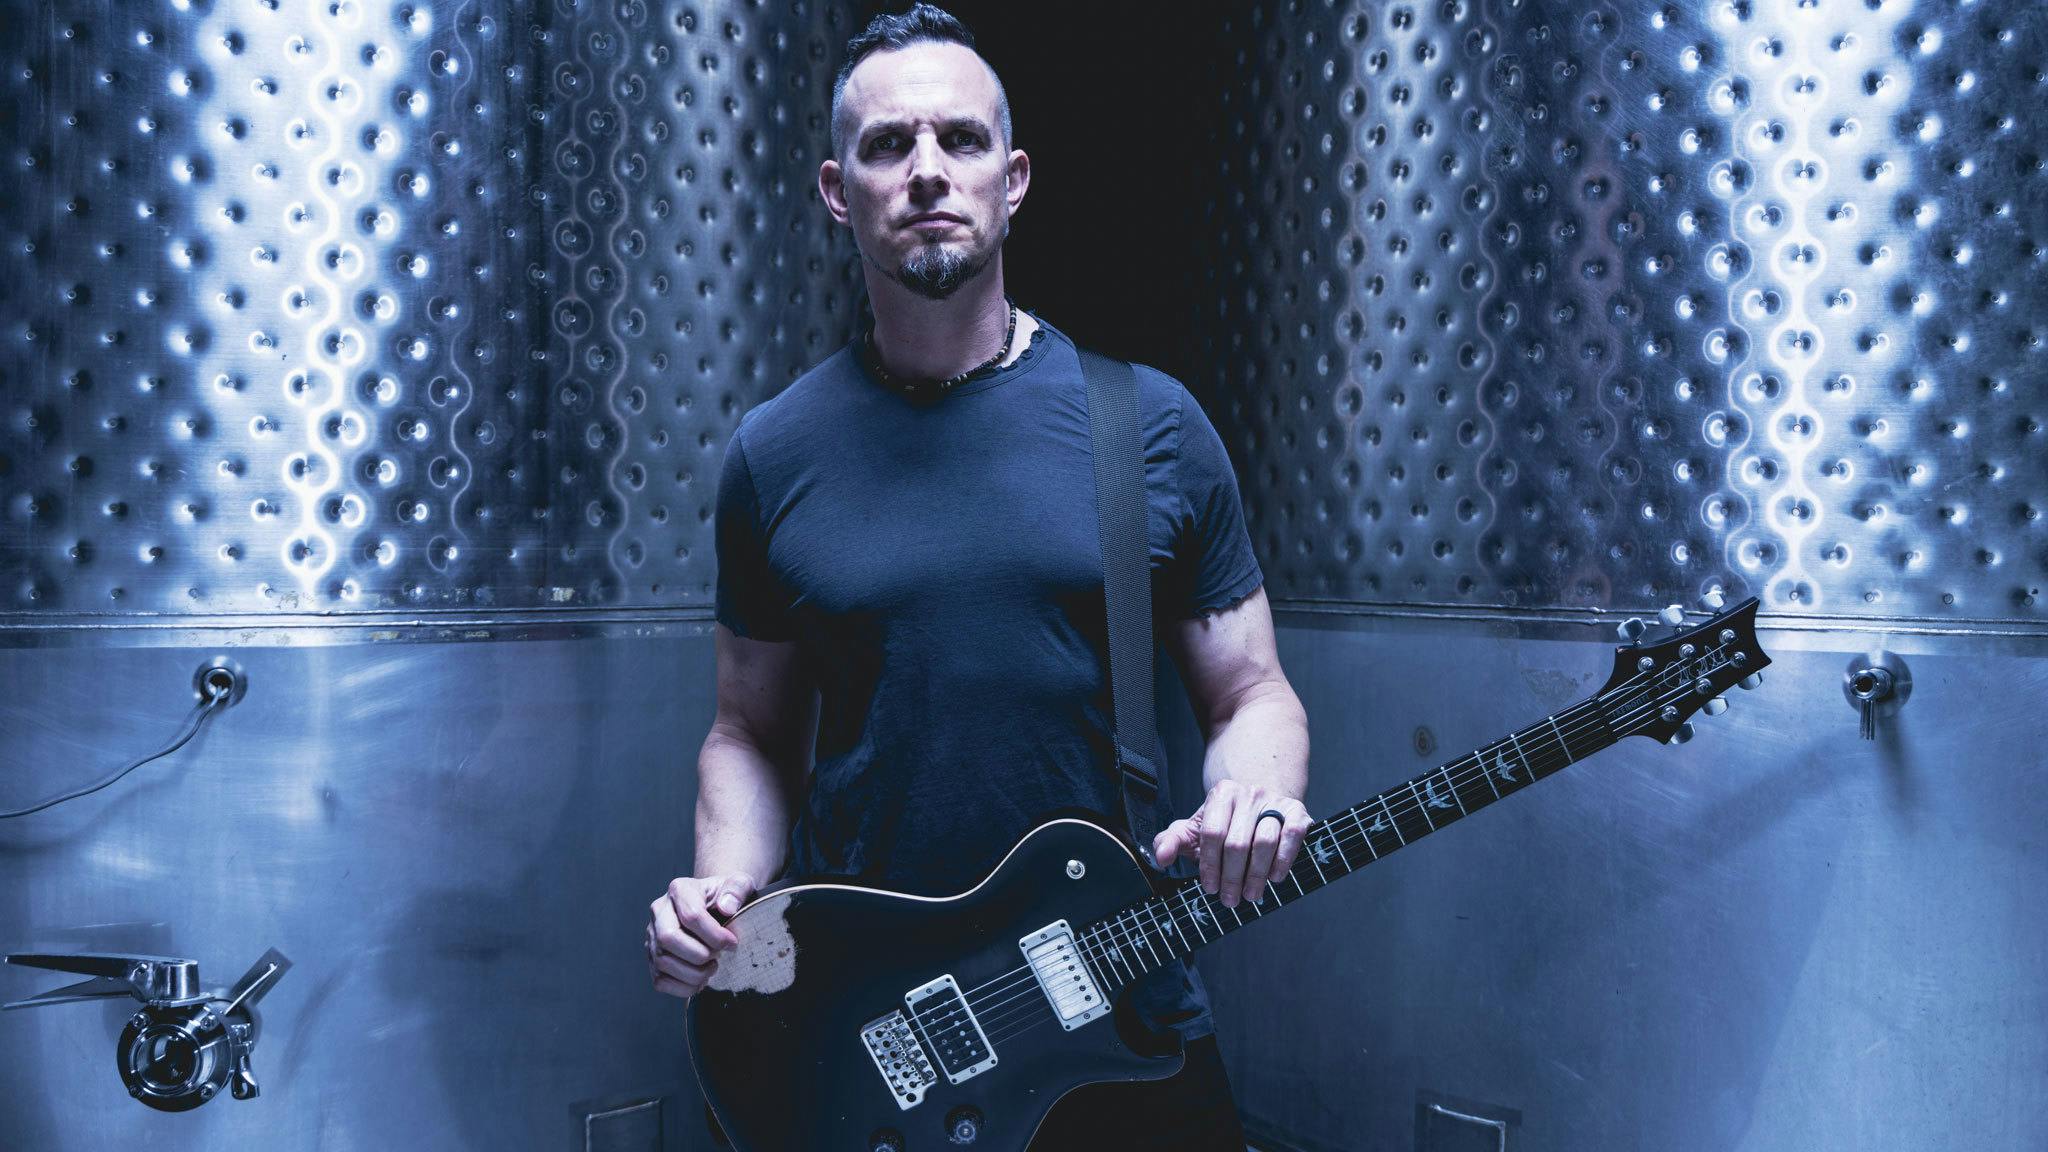 “I was offered a signed baseball to eat sushi… but I couldn’t do it”: 13 Questions with Mark Tremonti